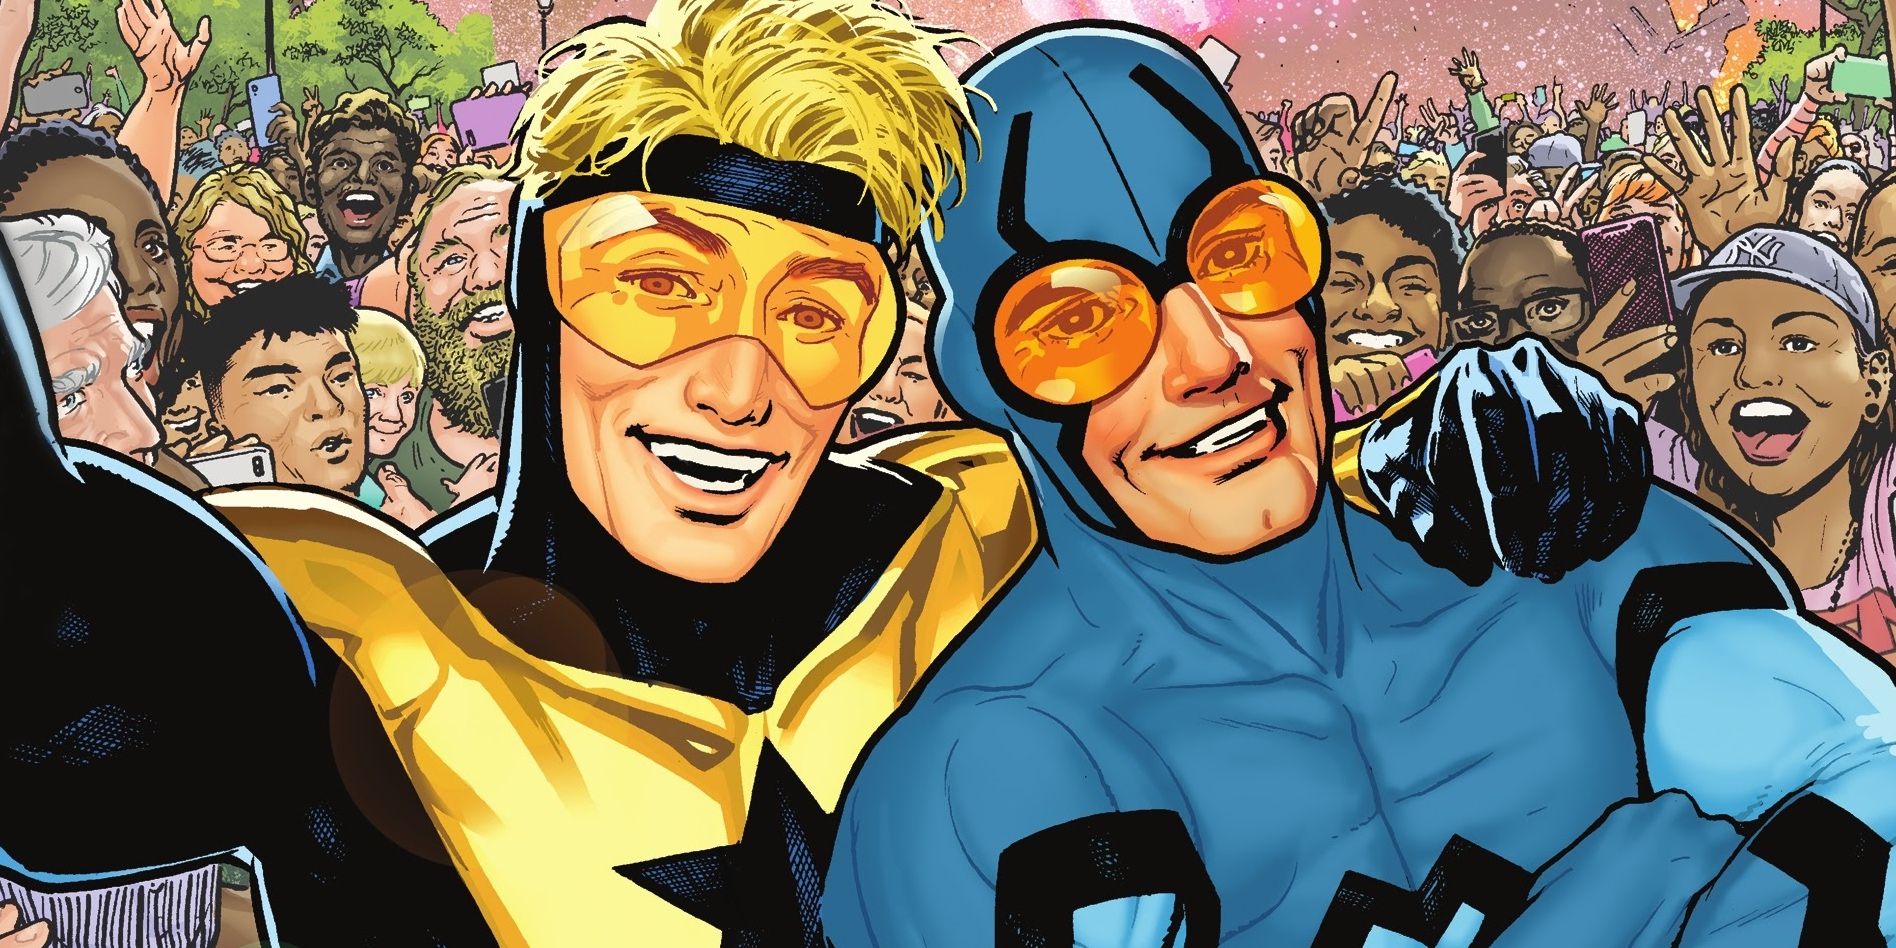 Booster Gold and Blue Beetle huging and taking a selfie